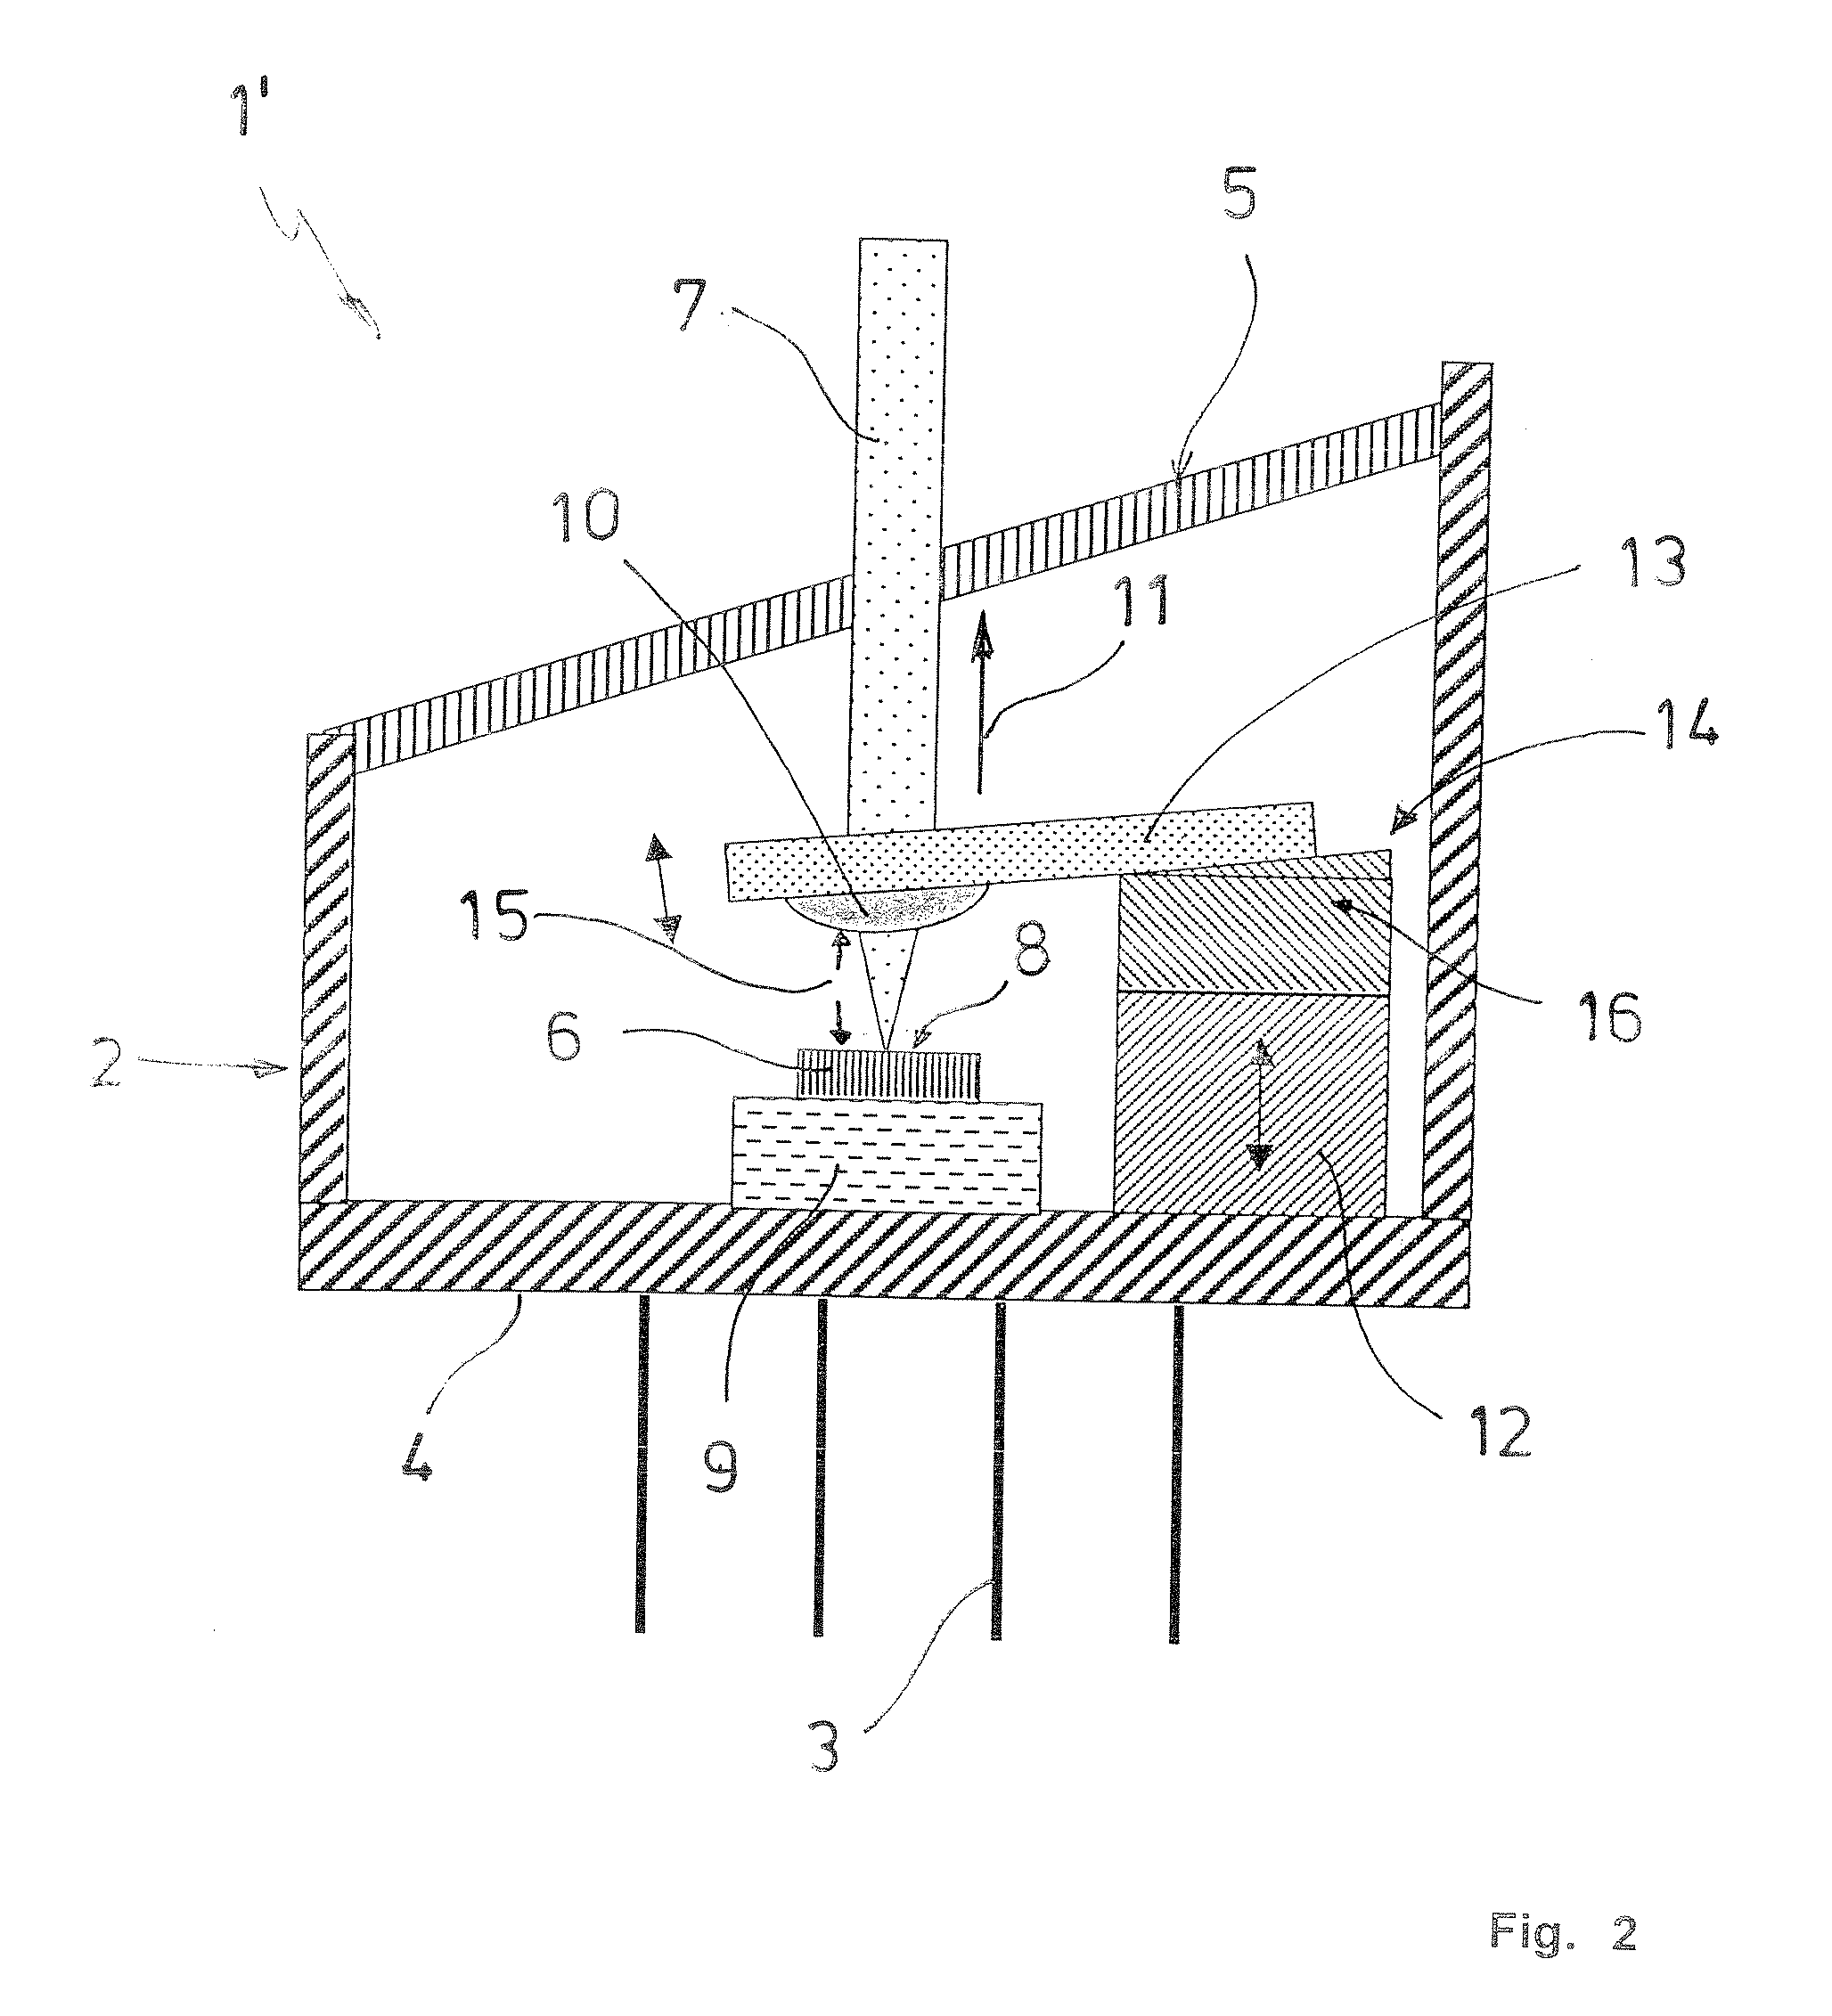 Laser diode structure with reduced interference signals